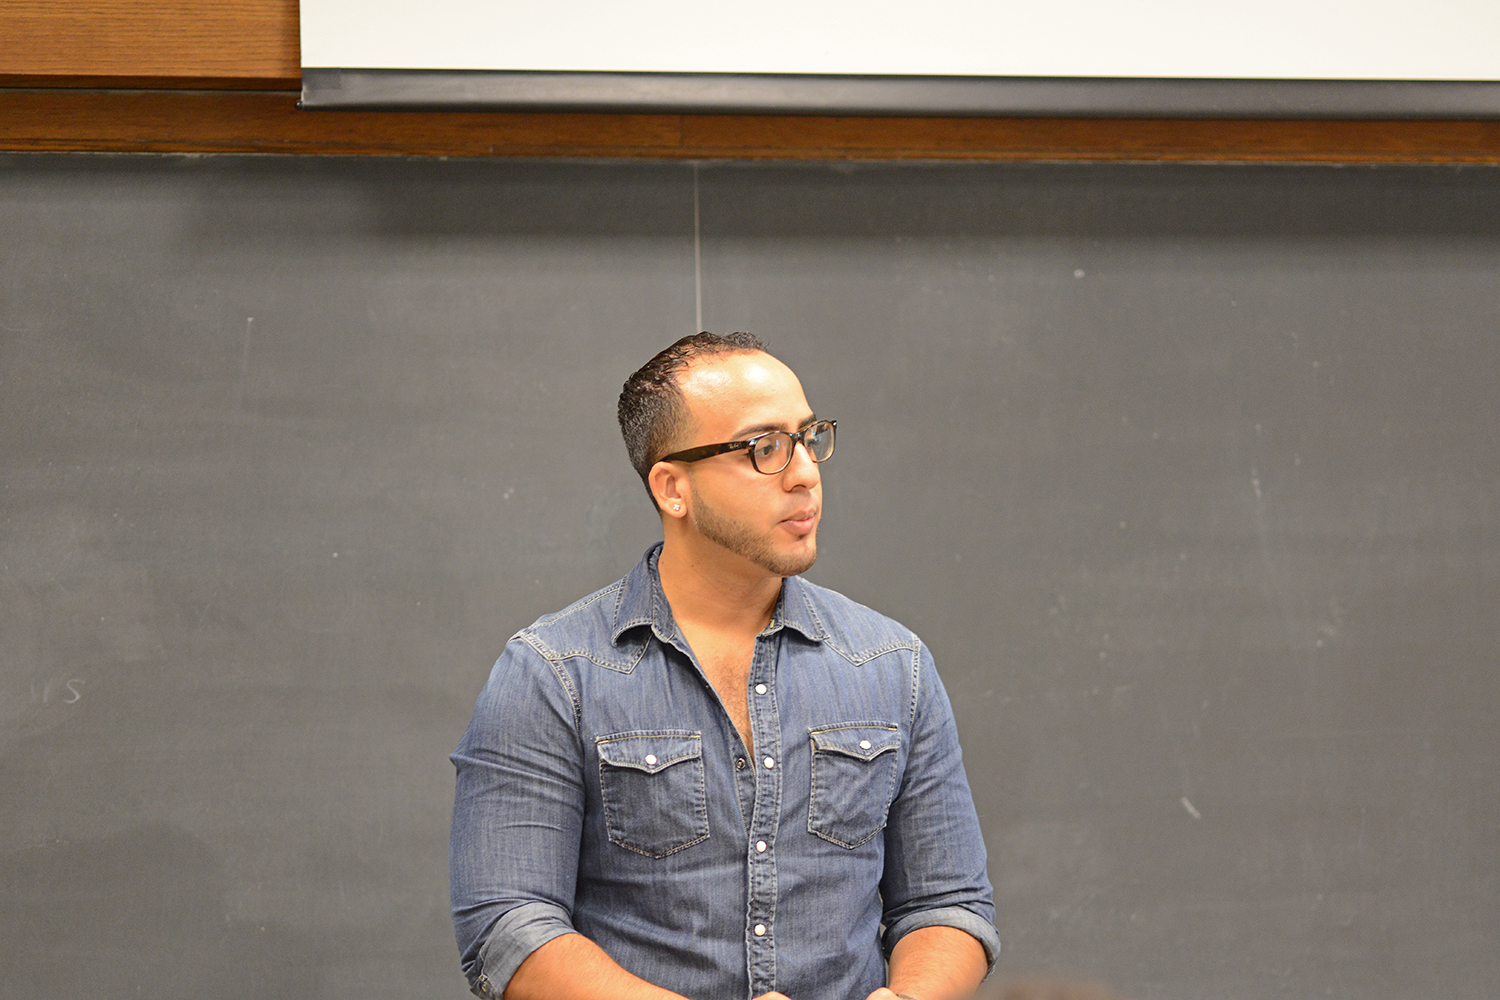 Andy Rojas spoke on “Trauma and the Sociological Changes in Japan Caused by the Atomic Bomb.”